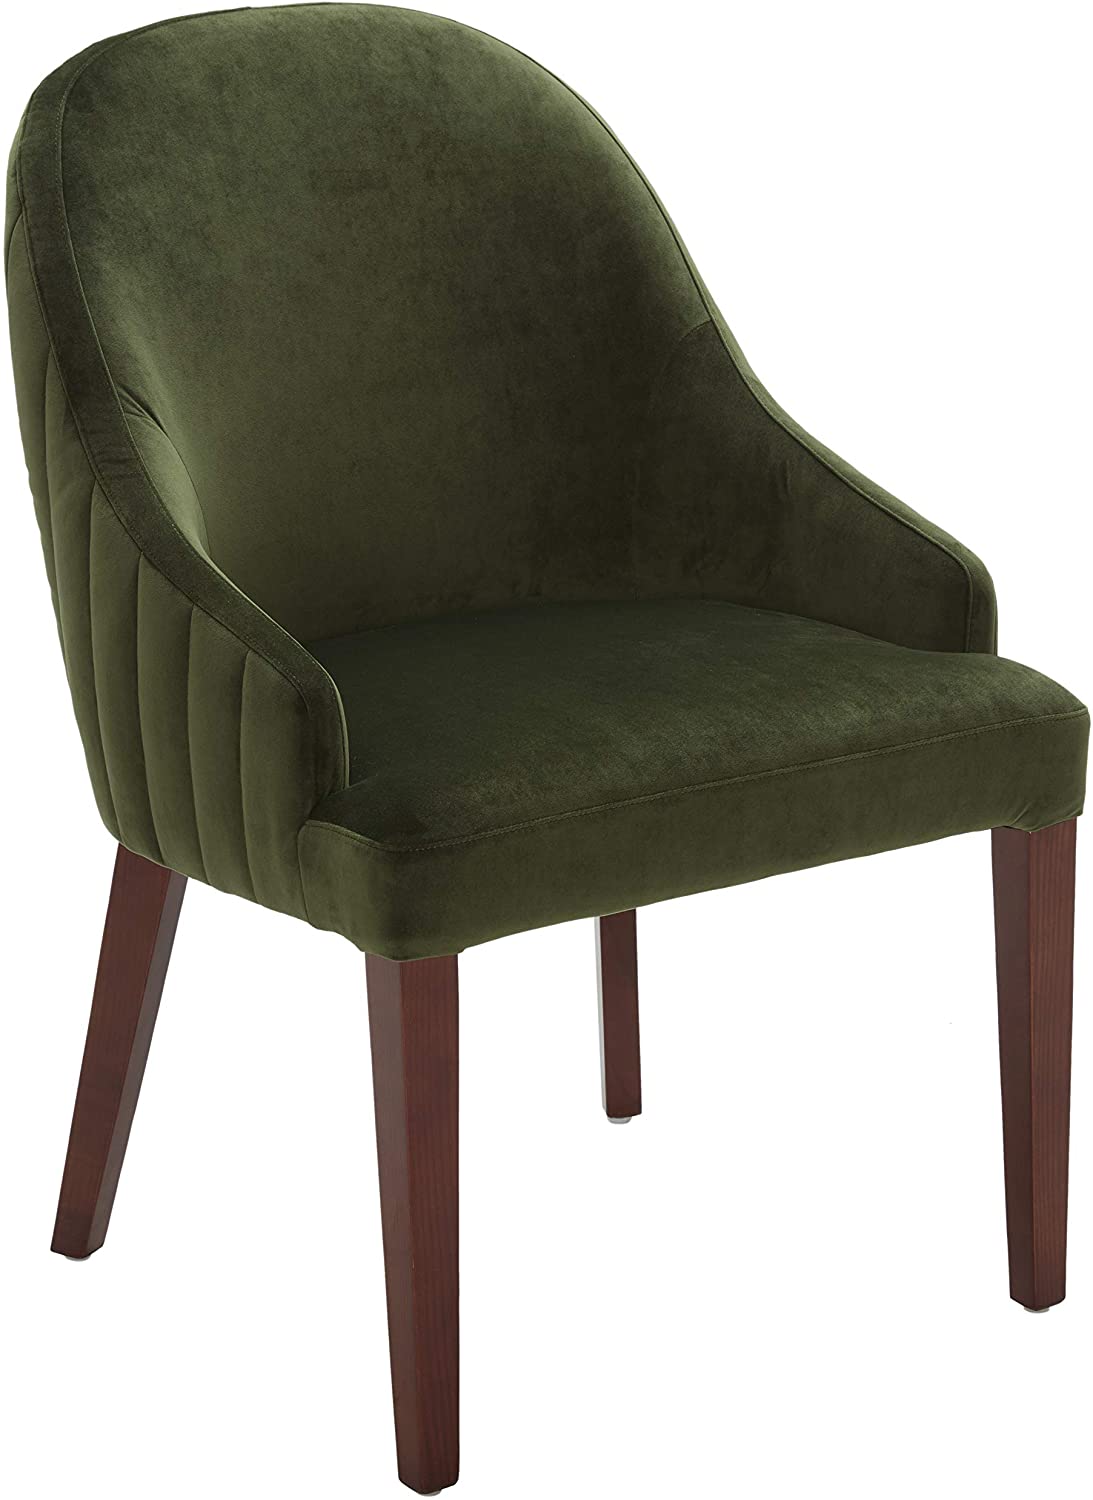 B07QGWLBBC Amazon Brand – Rivet Contemporary Curved Channel-Back Dining Chair, 35"H, Forest